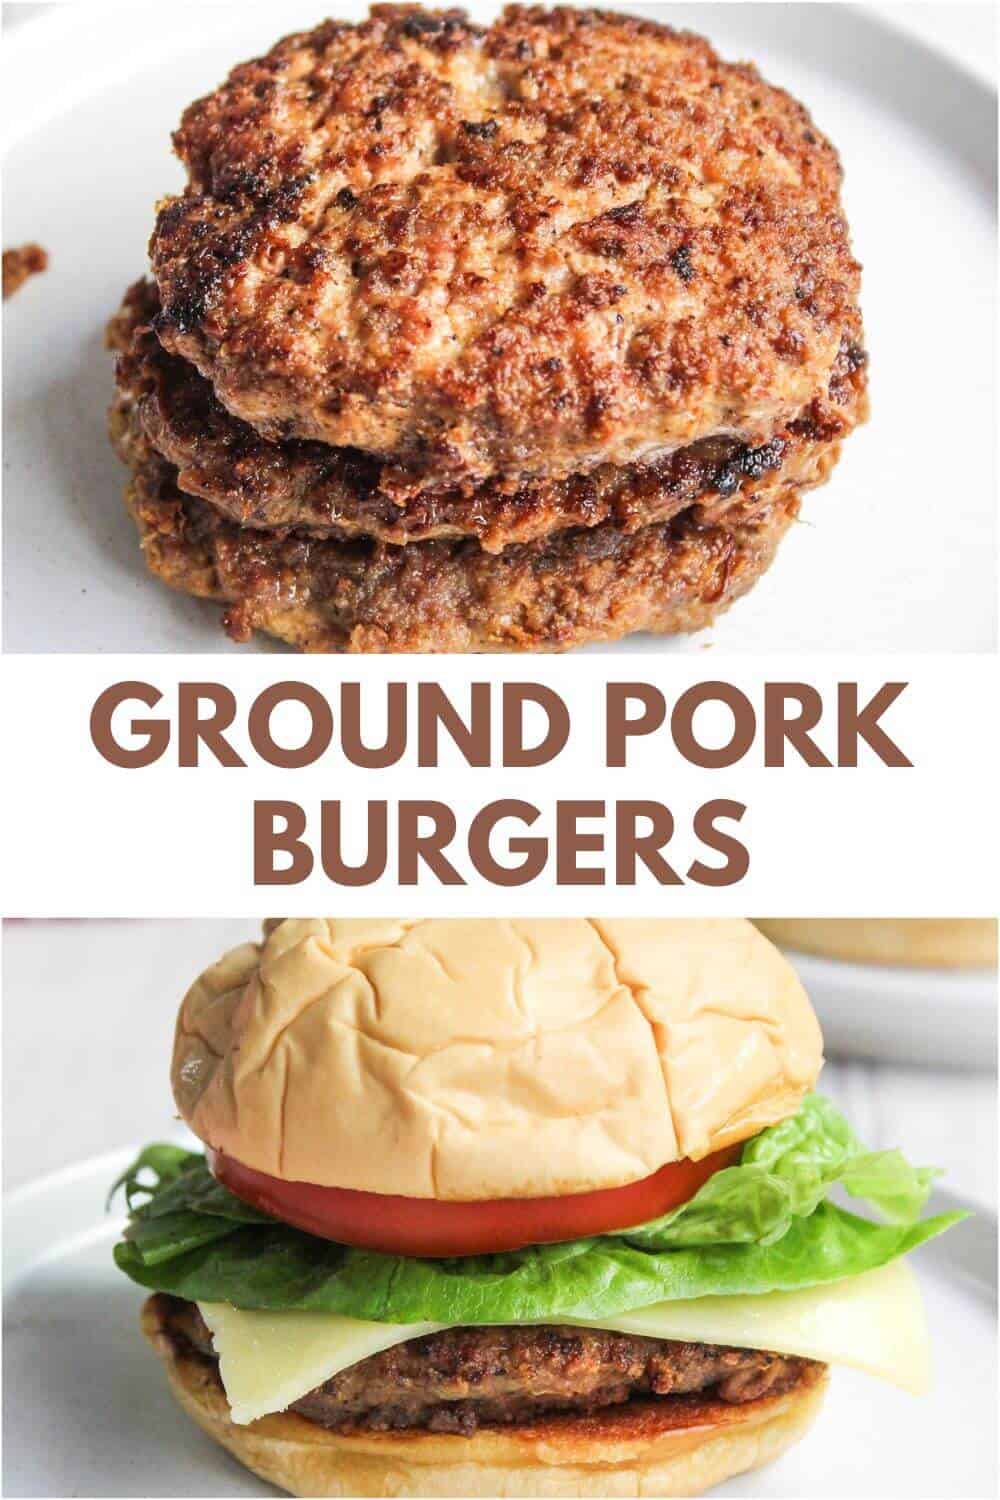 Ground pork burgers are stacked on top of each other.